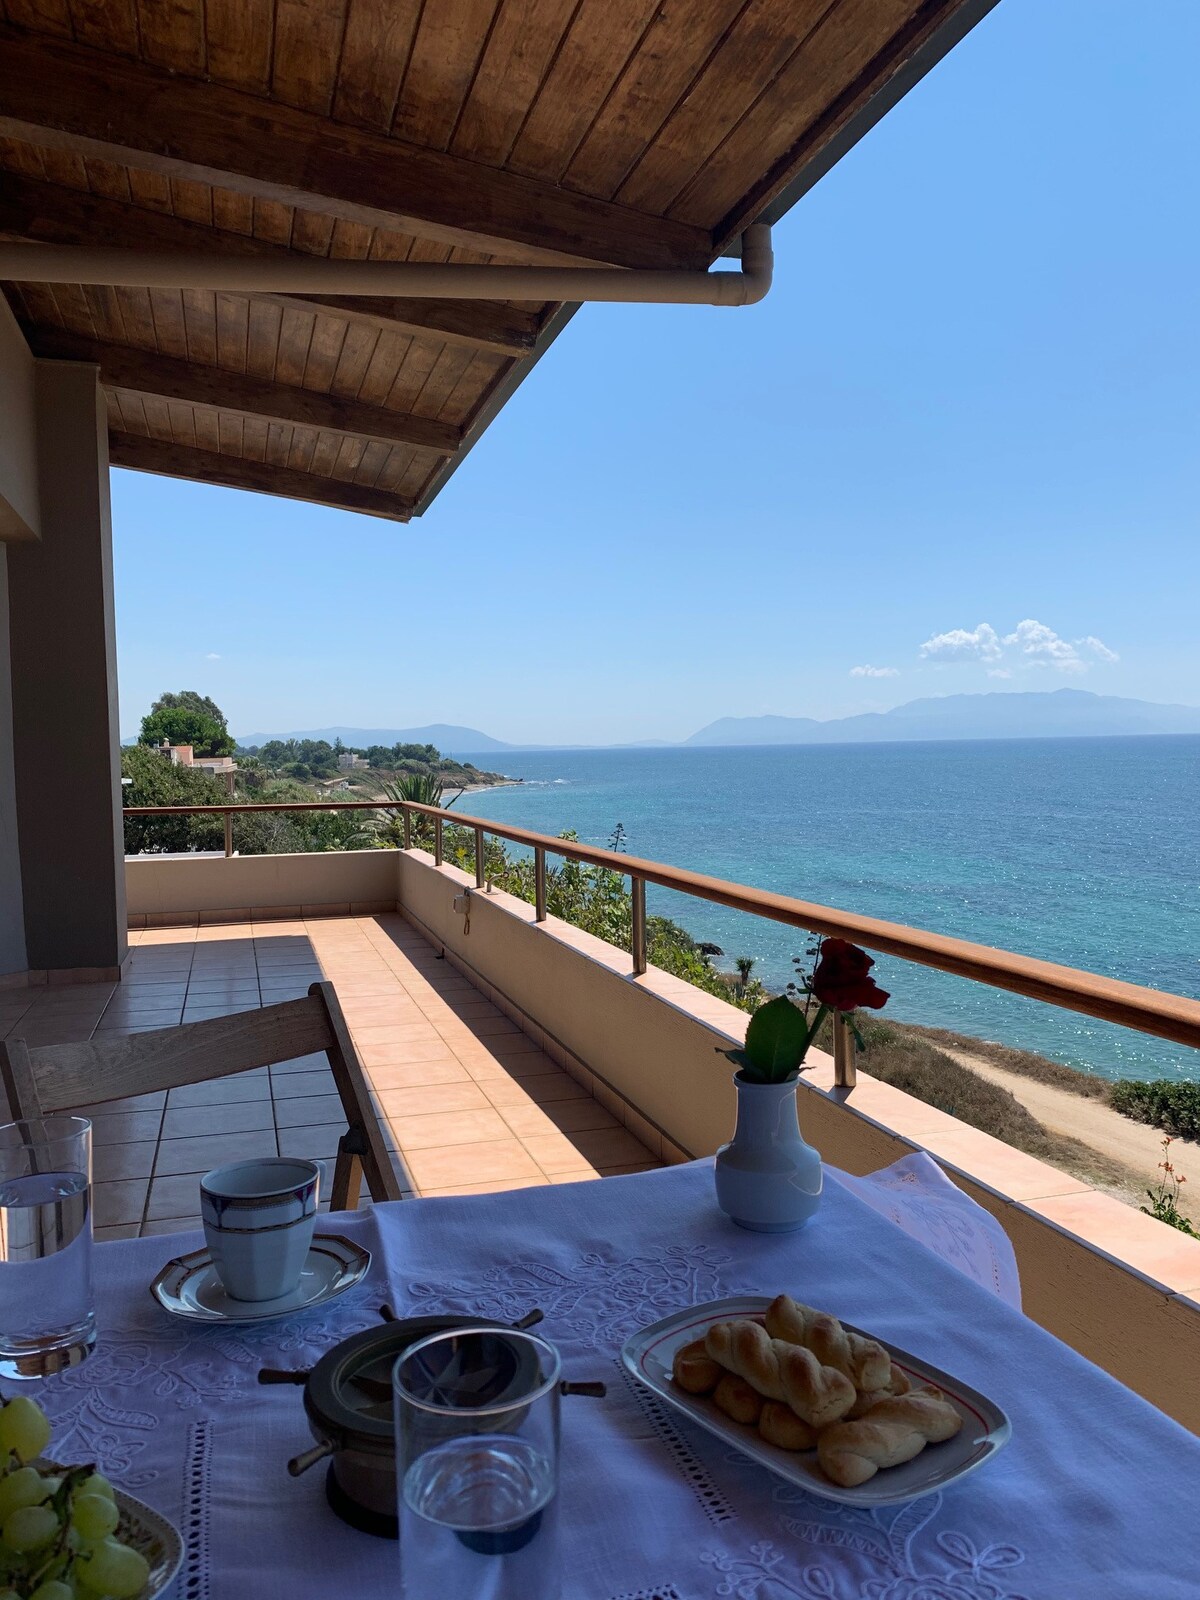 360º suite with endless views to the Ionian Sea